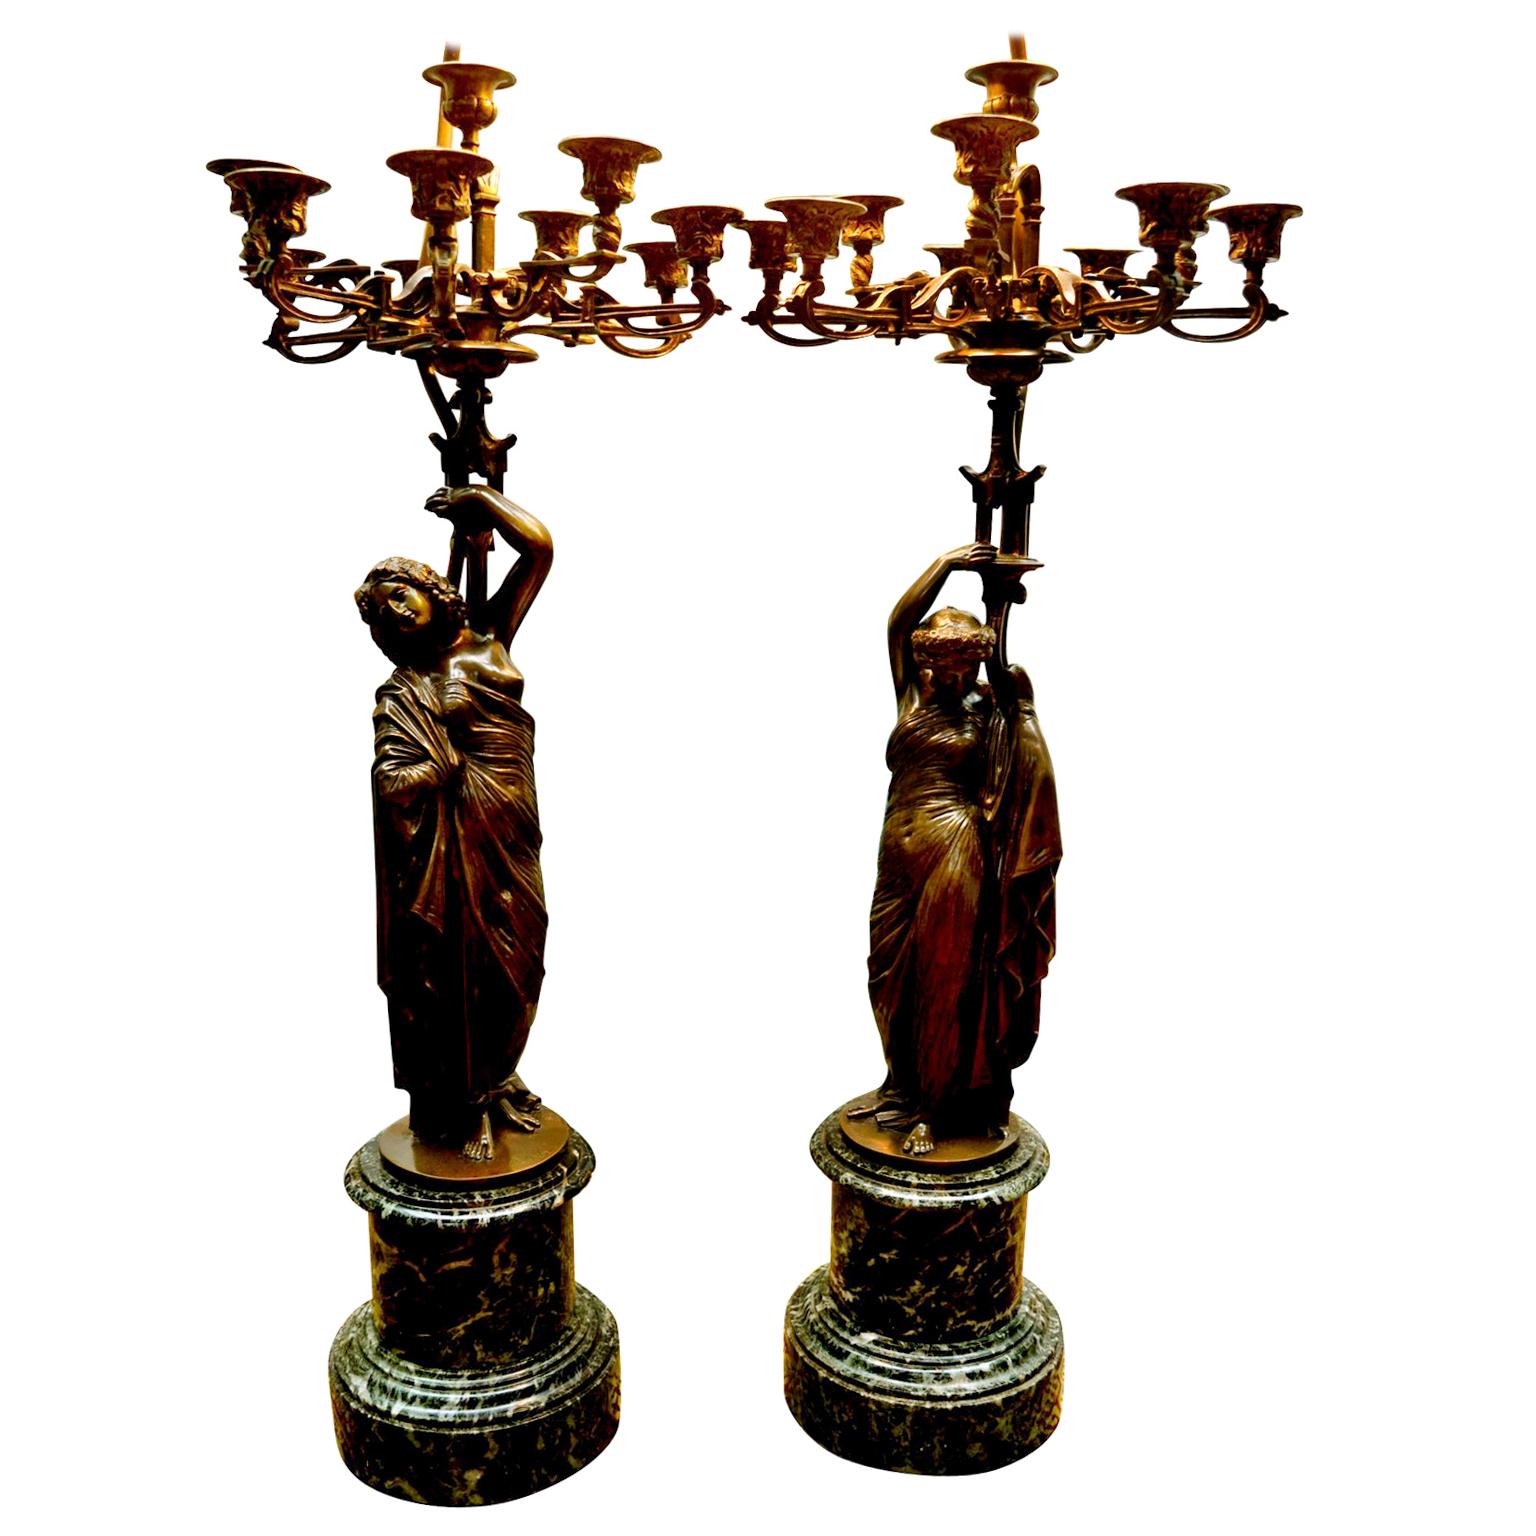 Pair of French 19th Century Figurative Patinated Bronze Candelabra Lamps In Good Condition For Sale In Vancouver, British Columbia